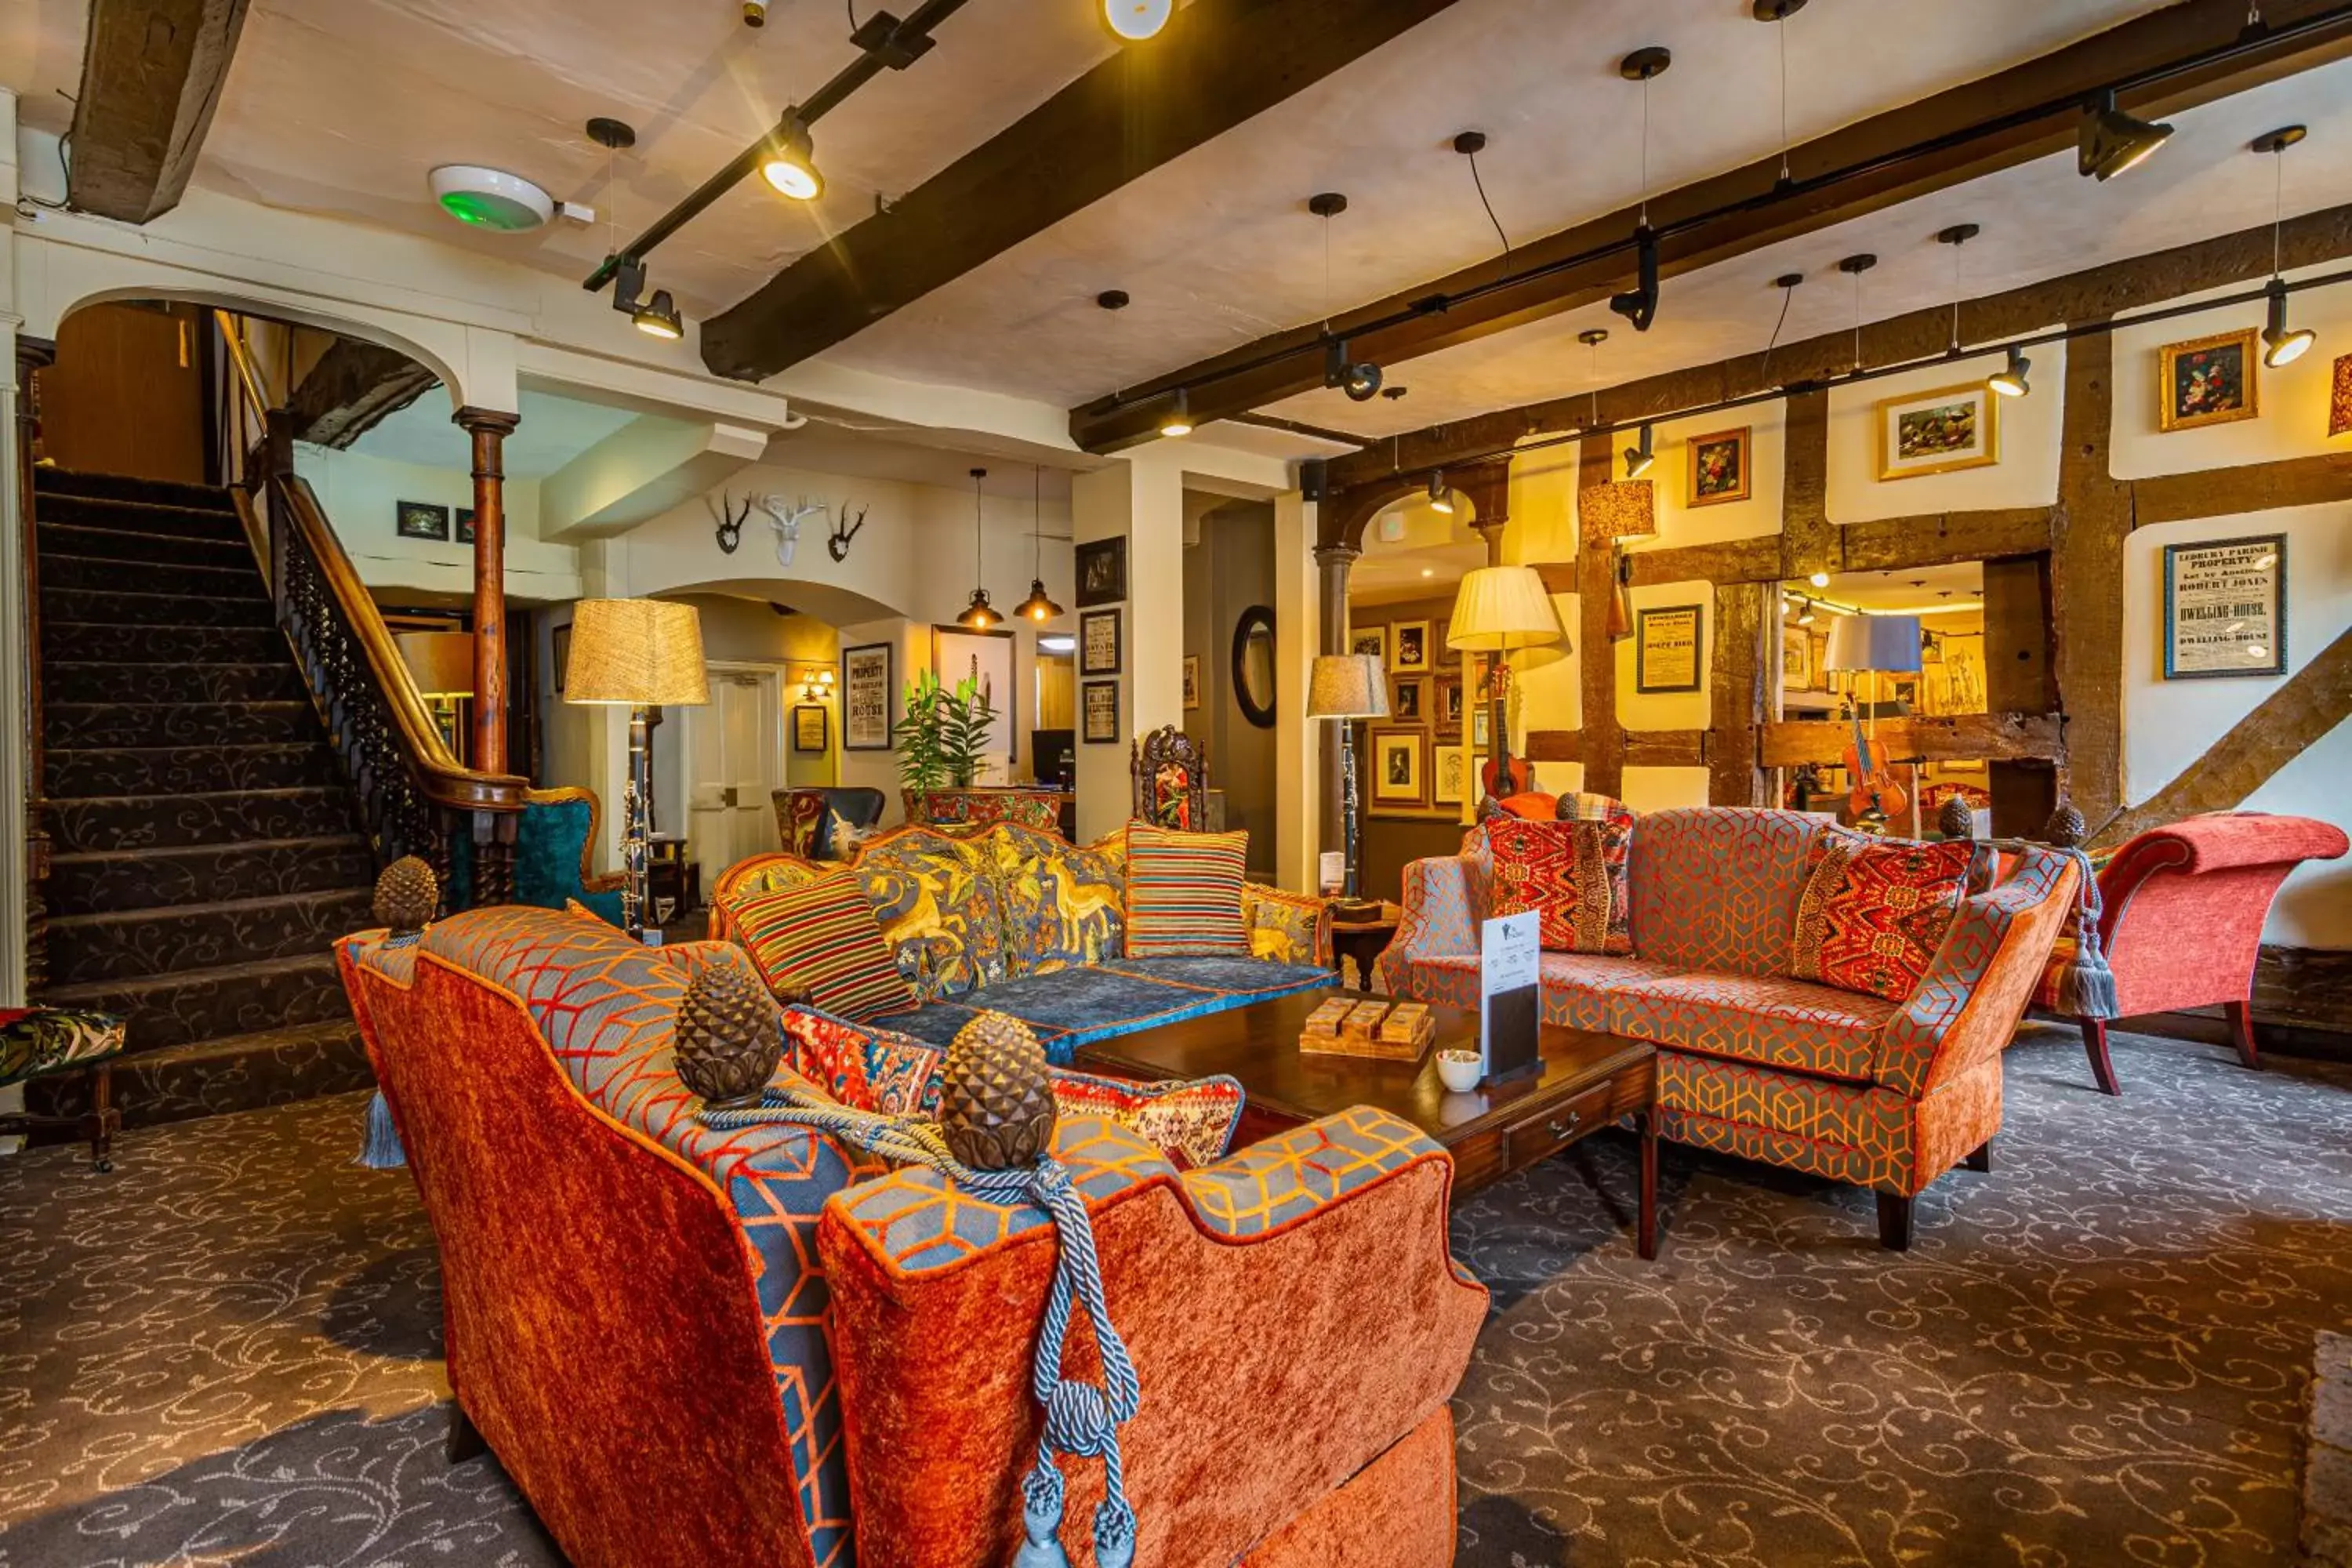 Communal lounge/ TV room in The Feathers Hotel, Ledbury, Herefordshire